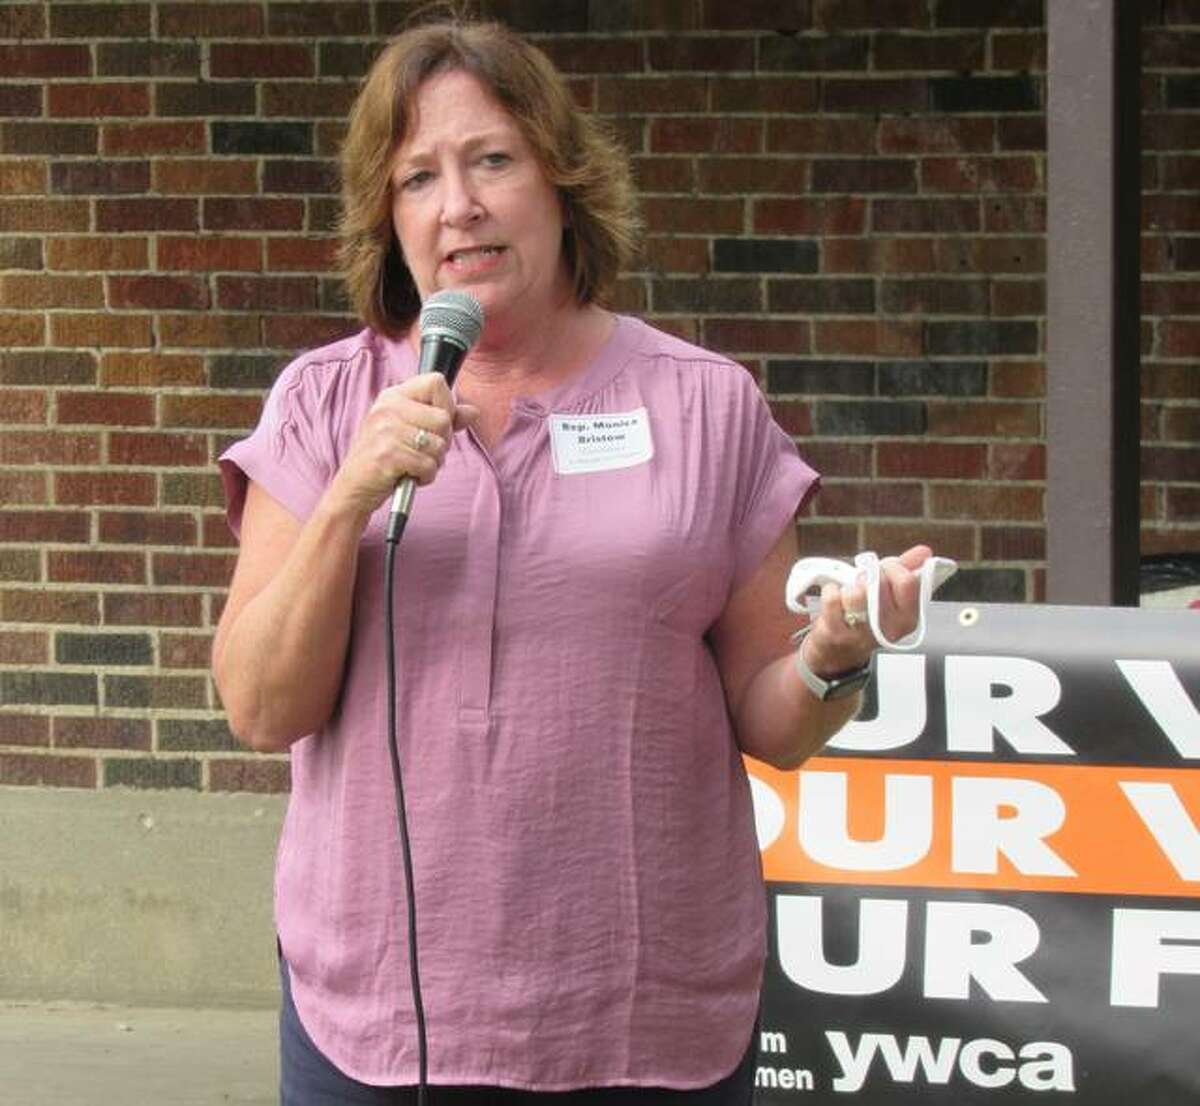 State Rep. Monica Bristow, D-Alton, addresses the YWCA of Alton’s Get out the Vote committee’s second Madison County Candidates Forum on Saturday in Alton’s Kilion Park. She also spoke about Illinois’ graduated tax amendment and Illinois House Speaker Michael Madigan.